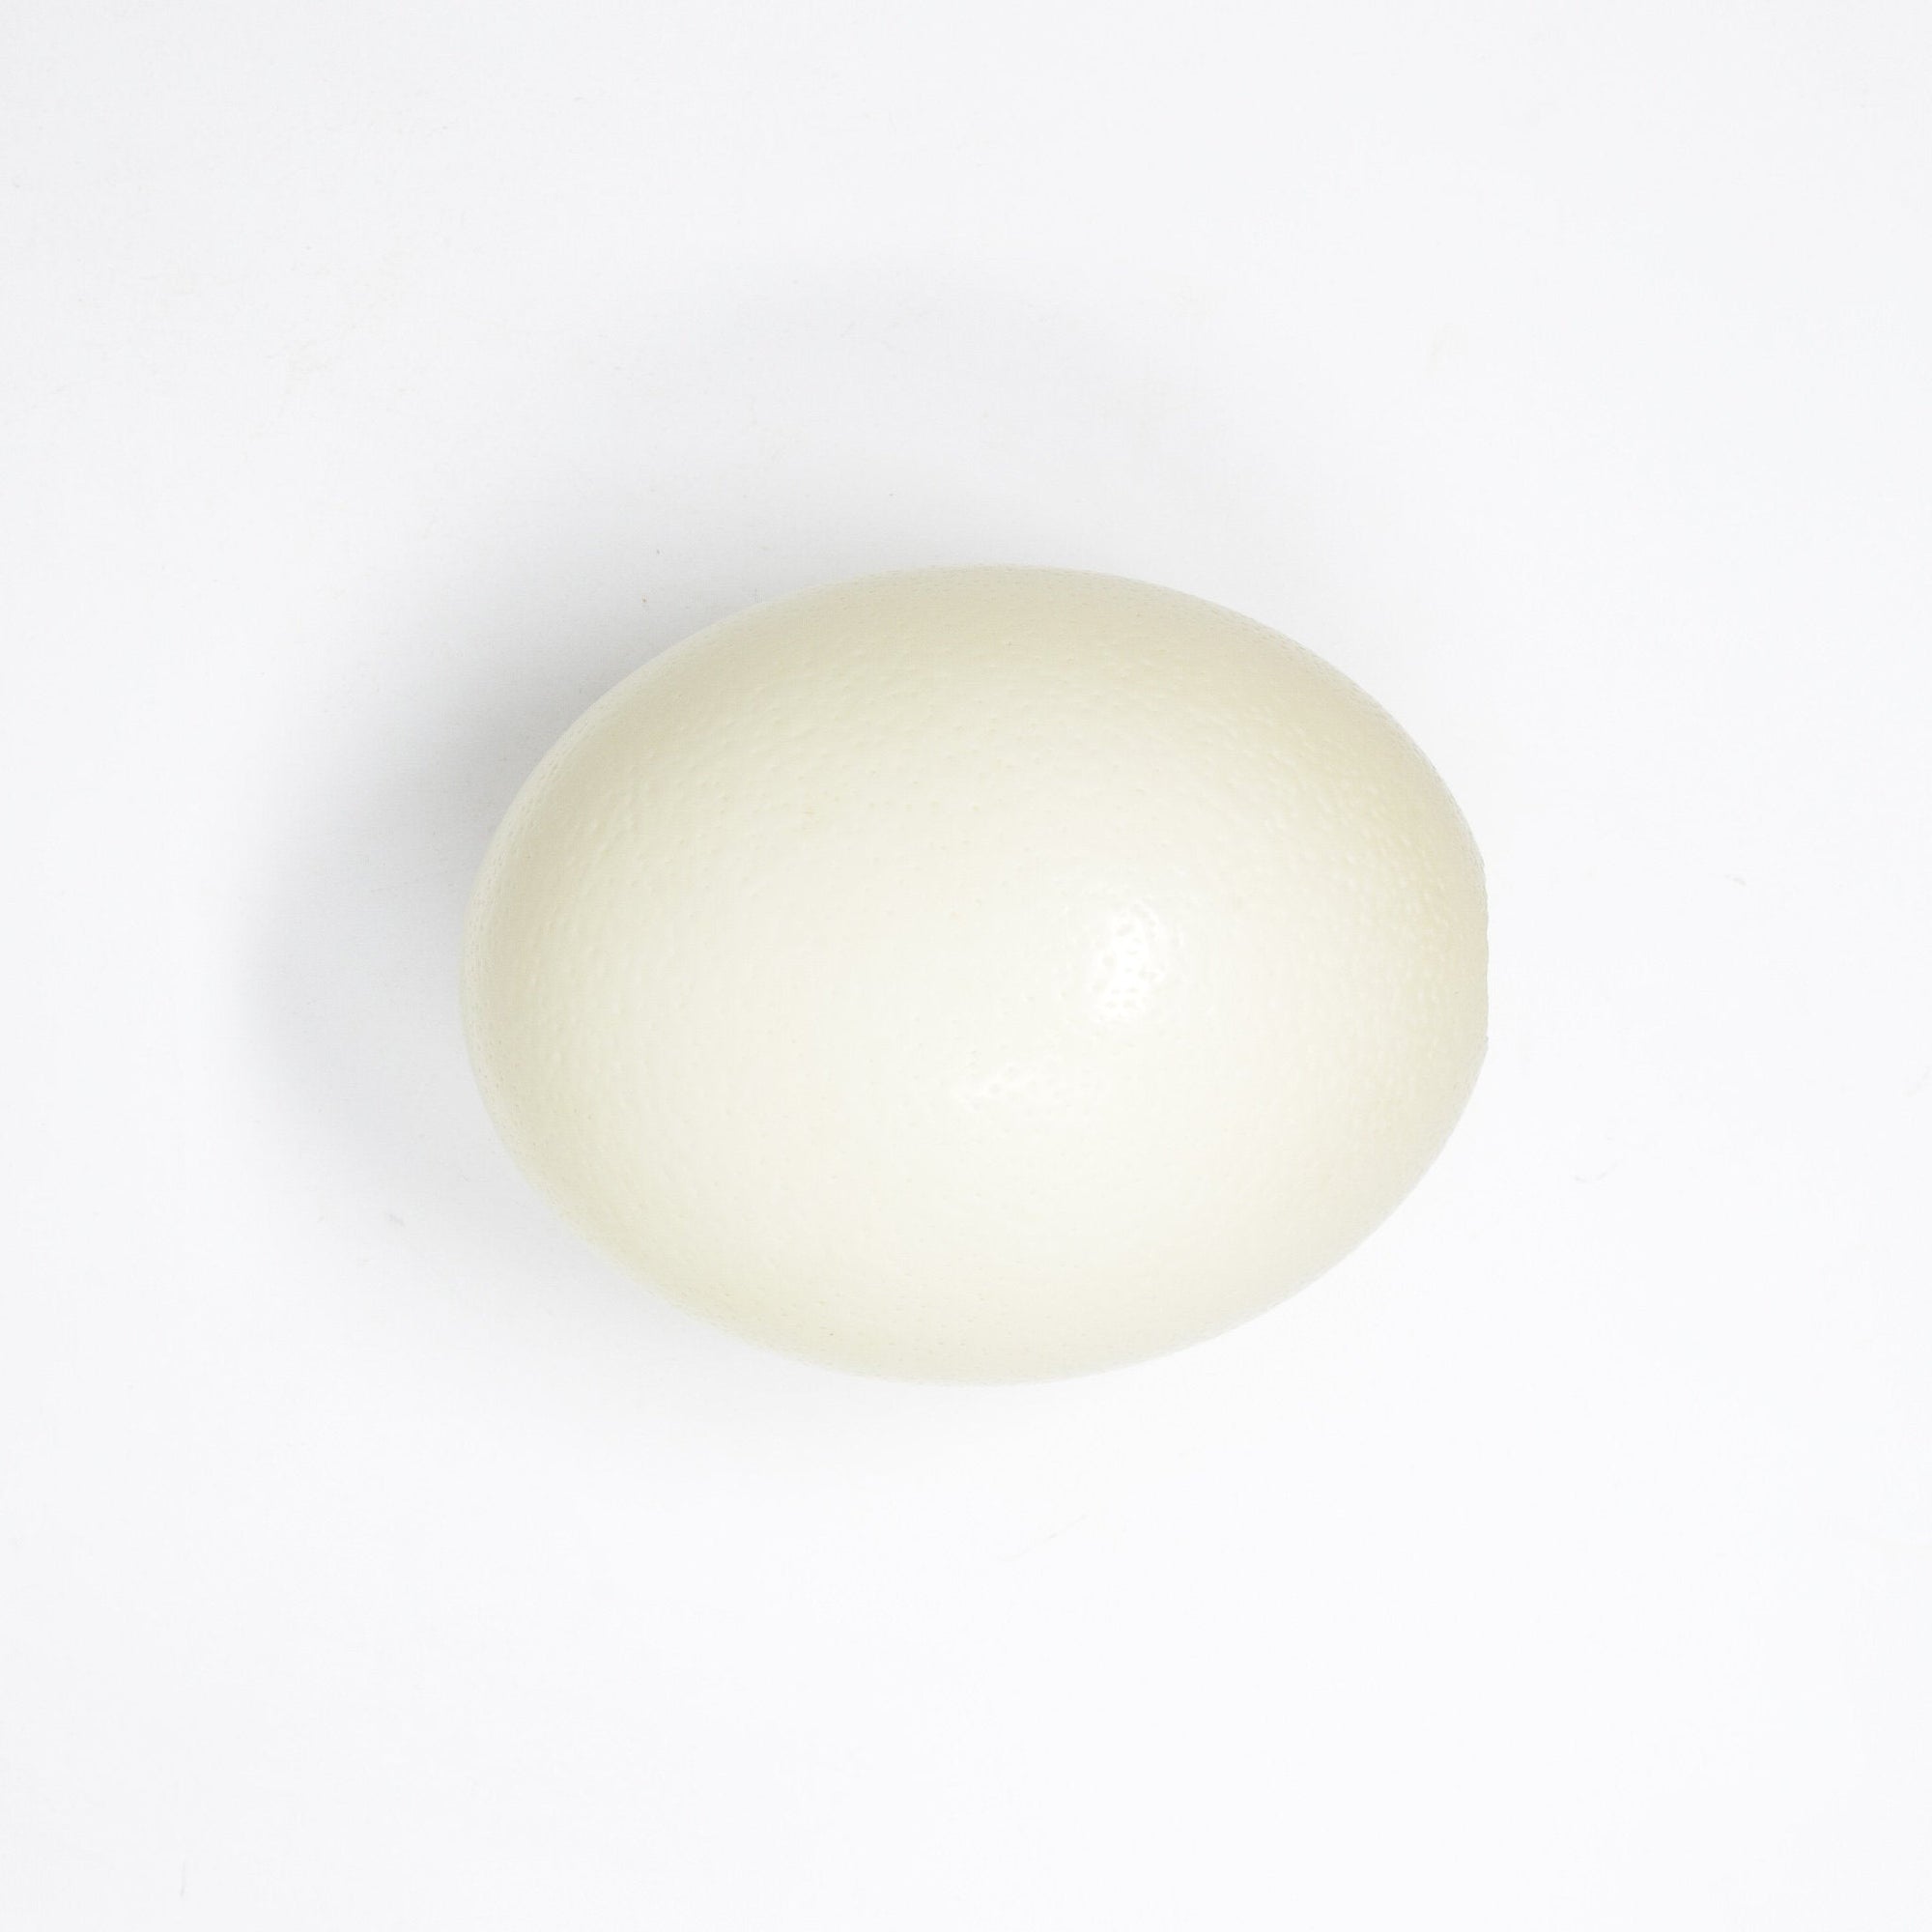 WHOLESALE 10 Genuine South Africa Ostrich Eggs XL, Blown, Top Grade, Natural History Gifts